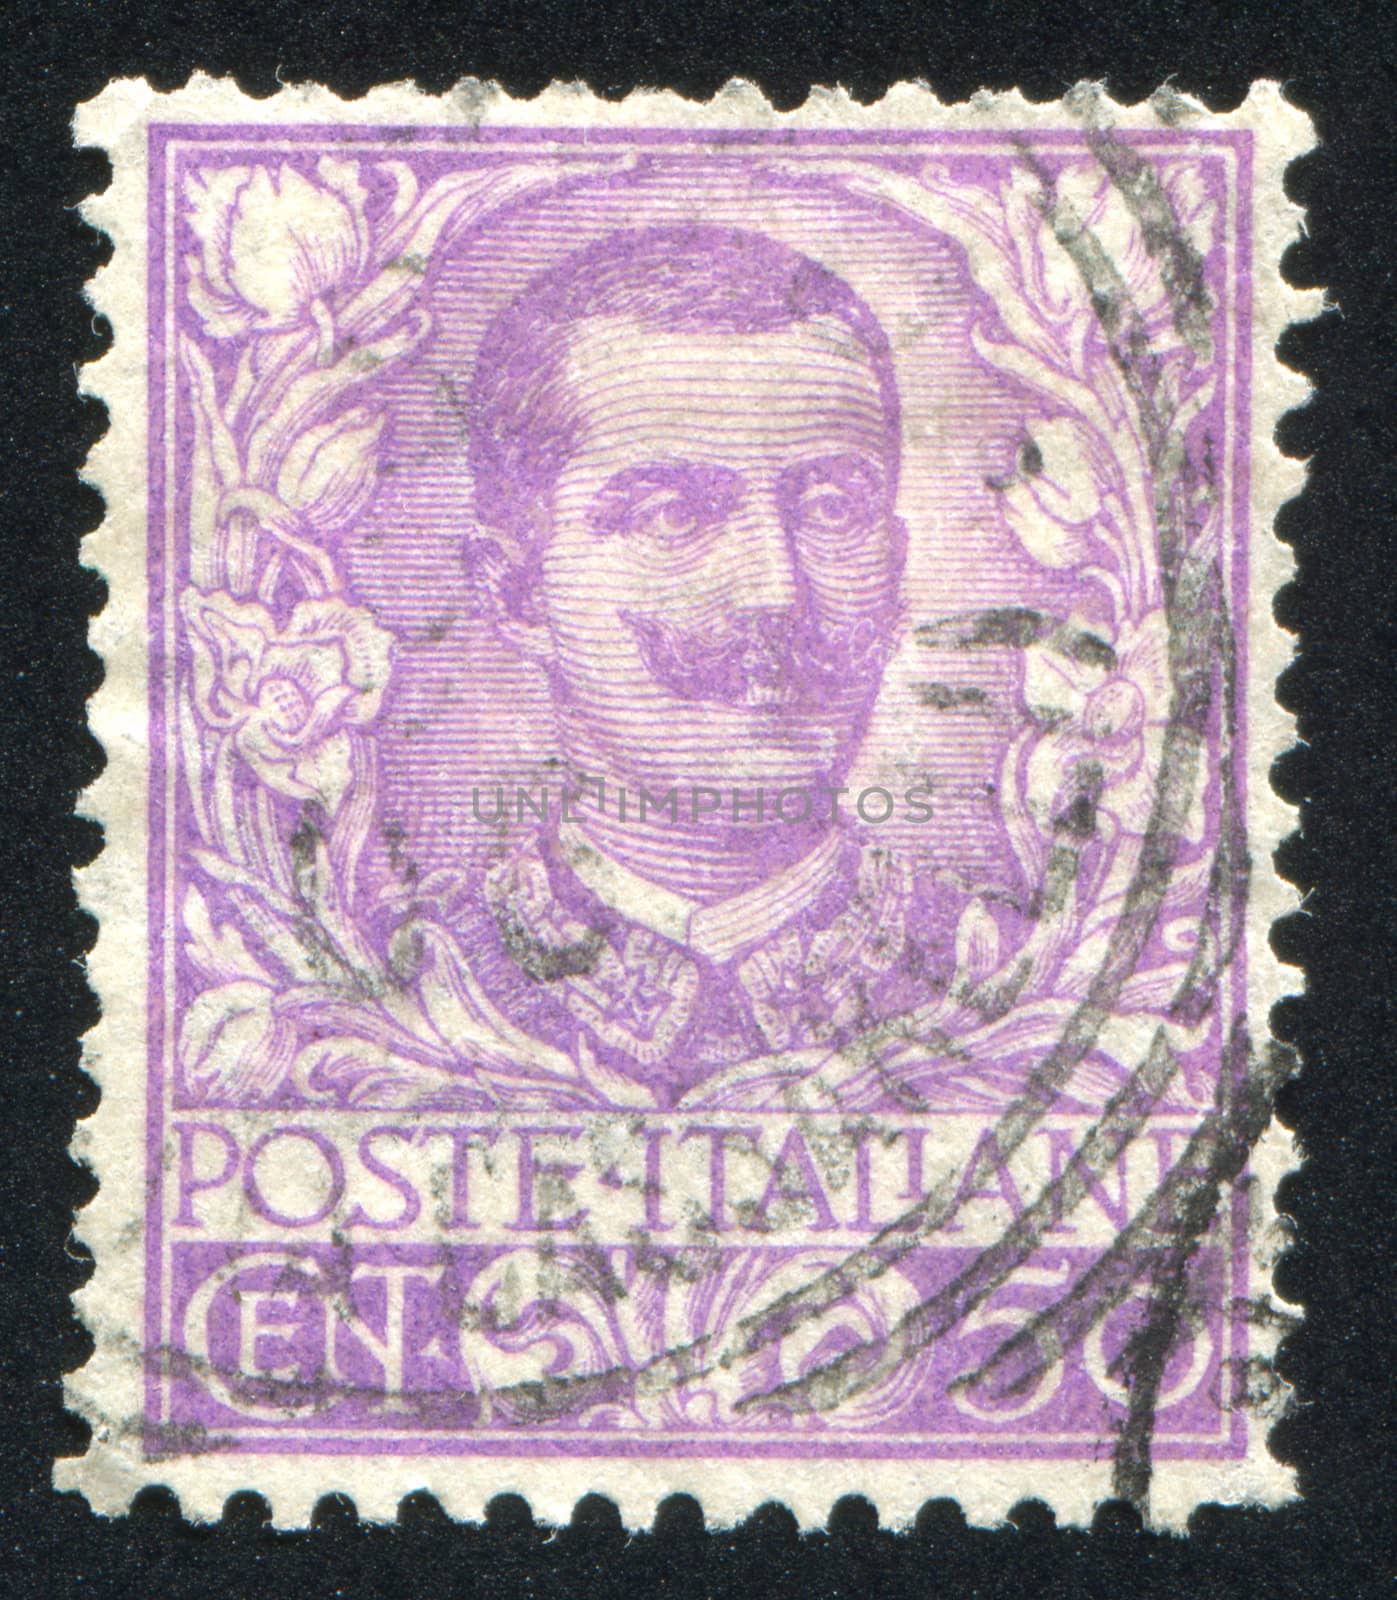 ITALY - CIRCA 1896: stamp printed by Italy, shows Victor Emmanuel III, circa 1896